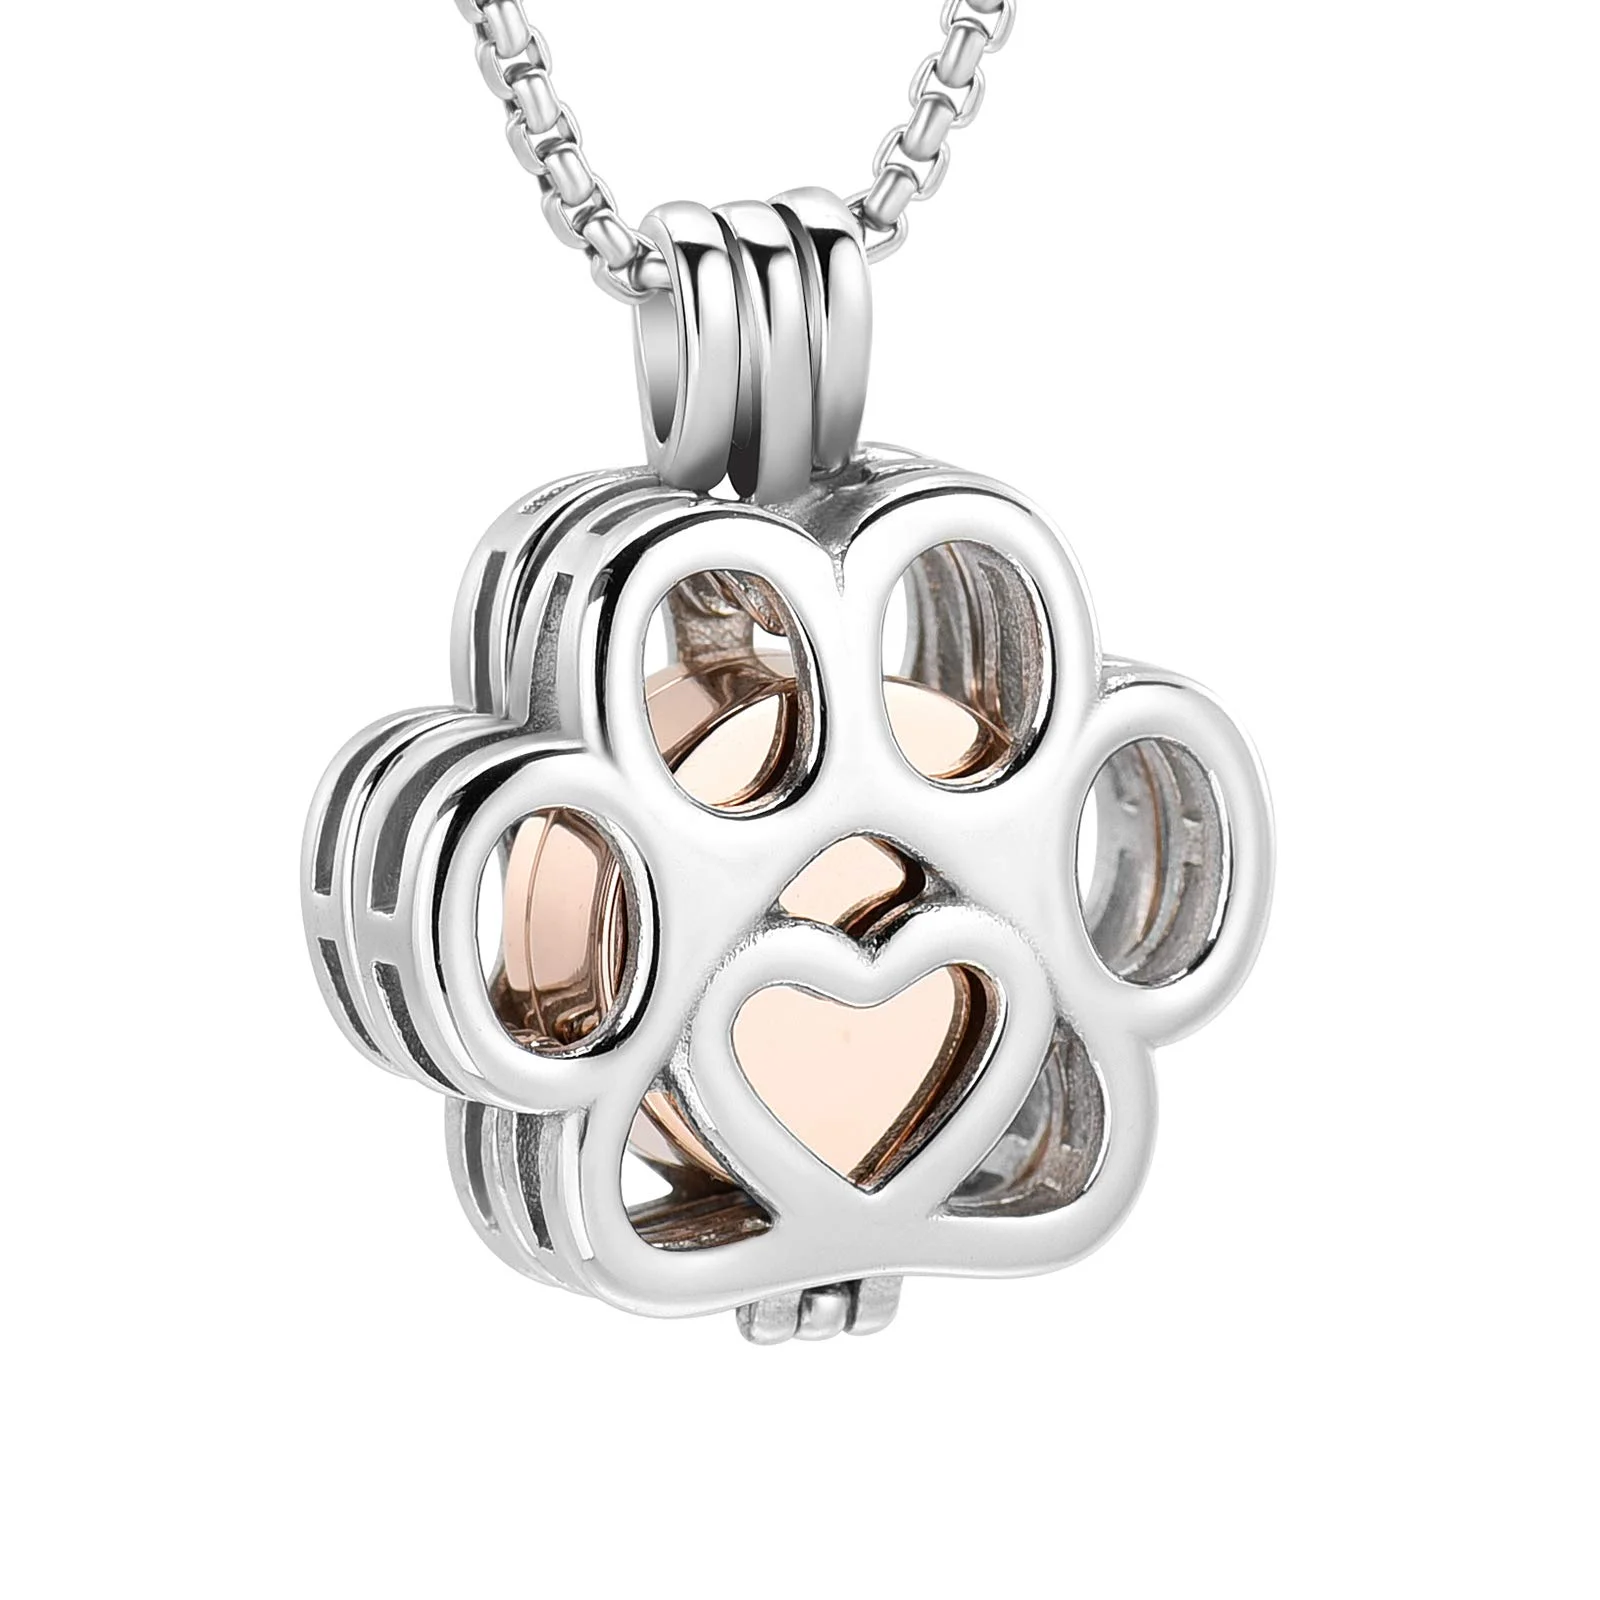 Pet Cremation Jewelry for Ashes Stainless Steel Memorial Locket Necklace Mini Keepsake Cremation Urn for Dog/Cat Paw